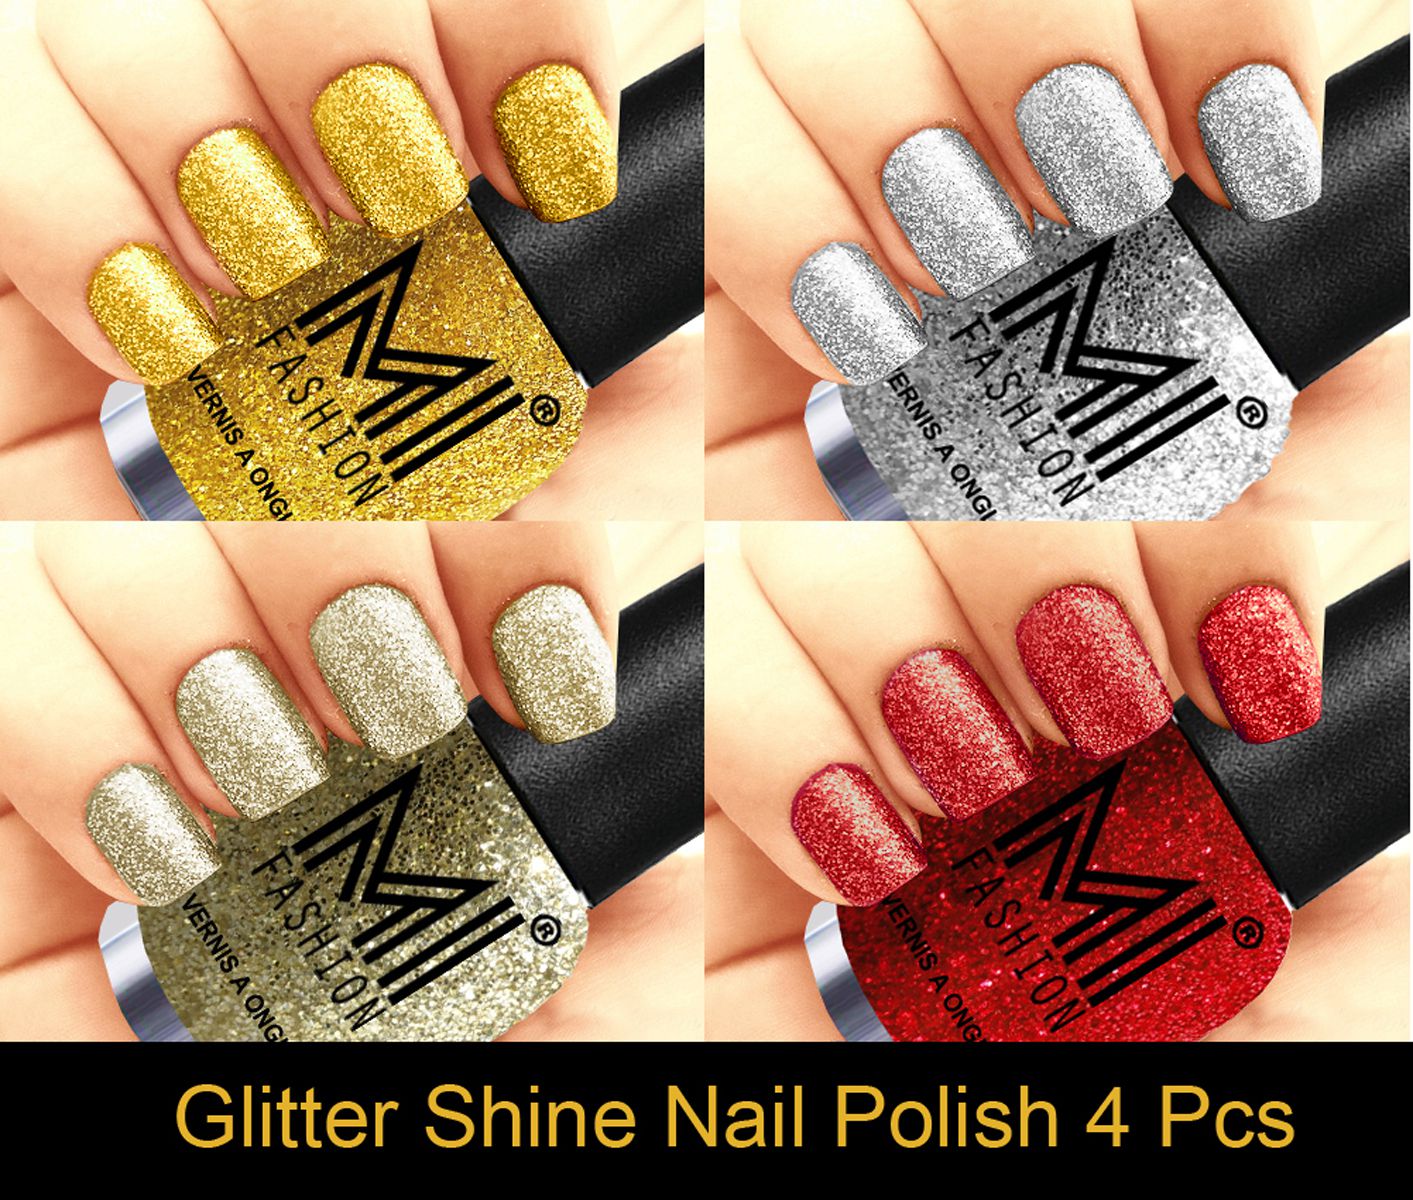 MI FASHION Long Lasting Professional Glitter Nail Polish Golden Gold,Silver,Silver Gold,Red Glitter 48 ml Pack of 4